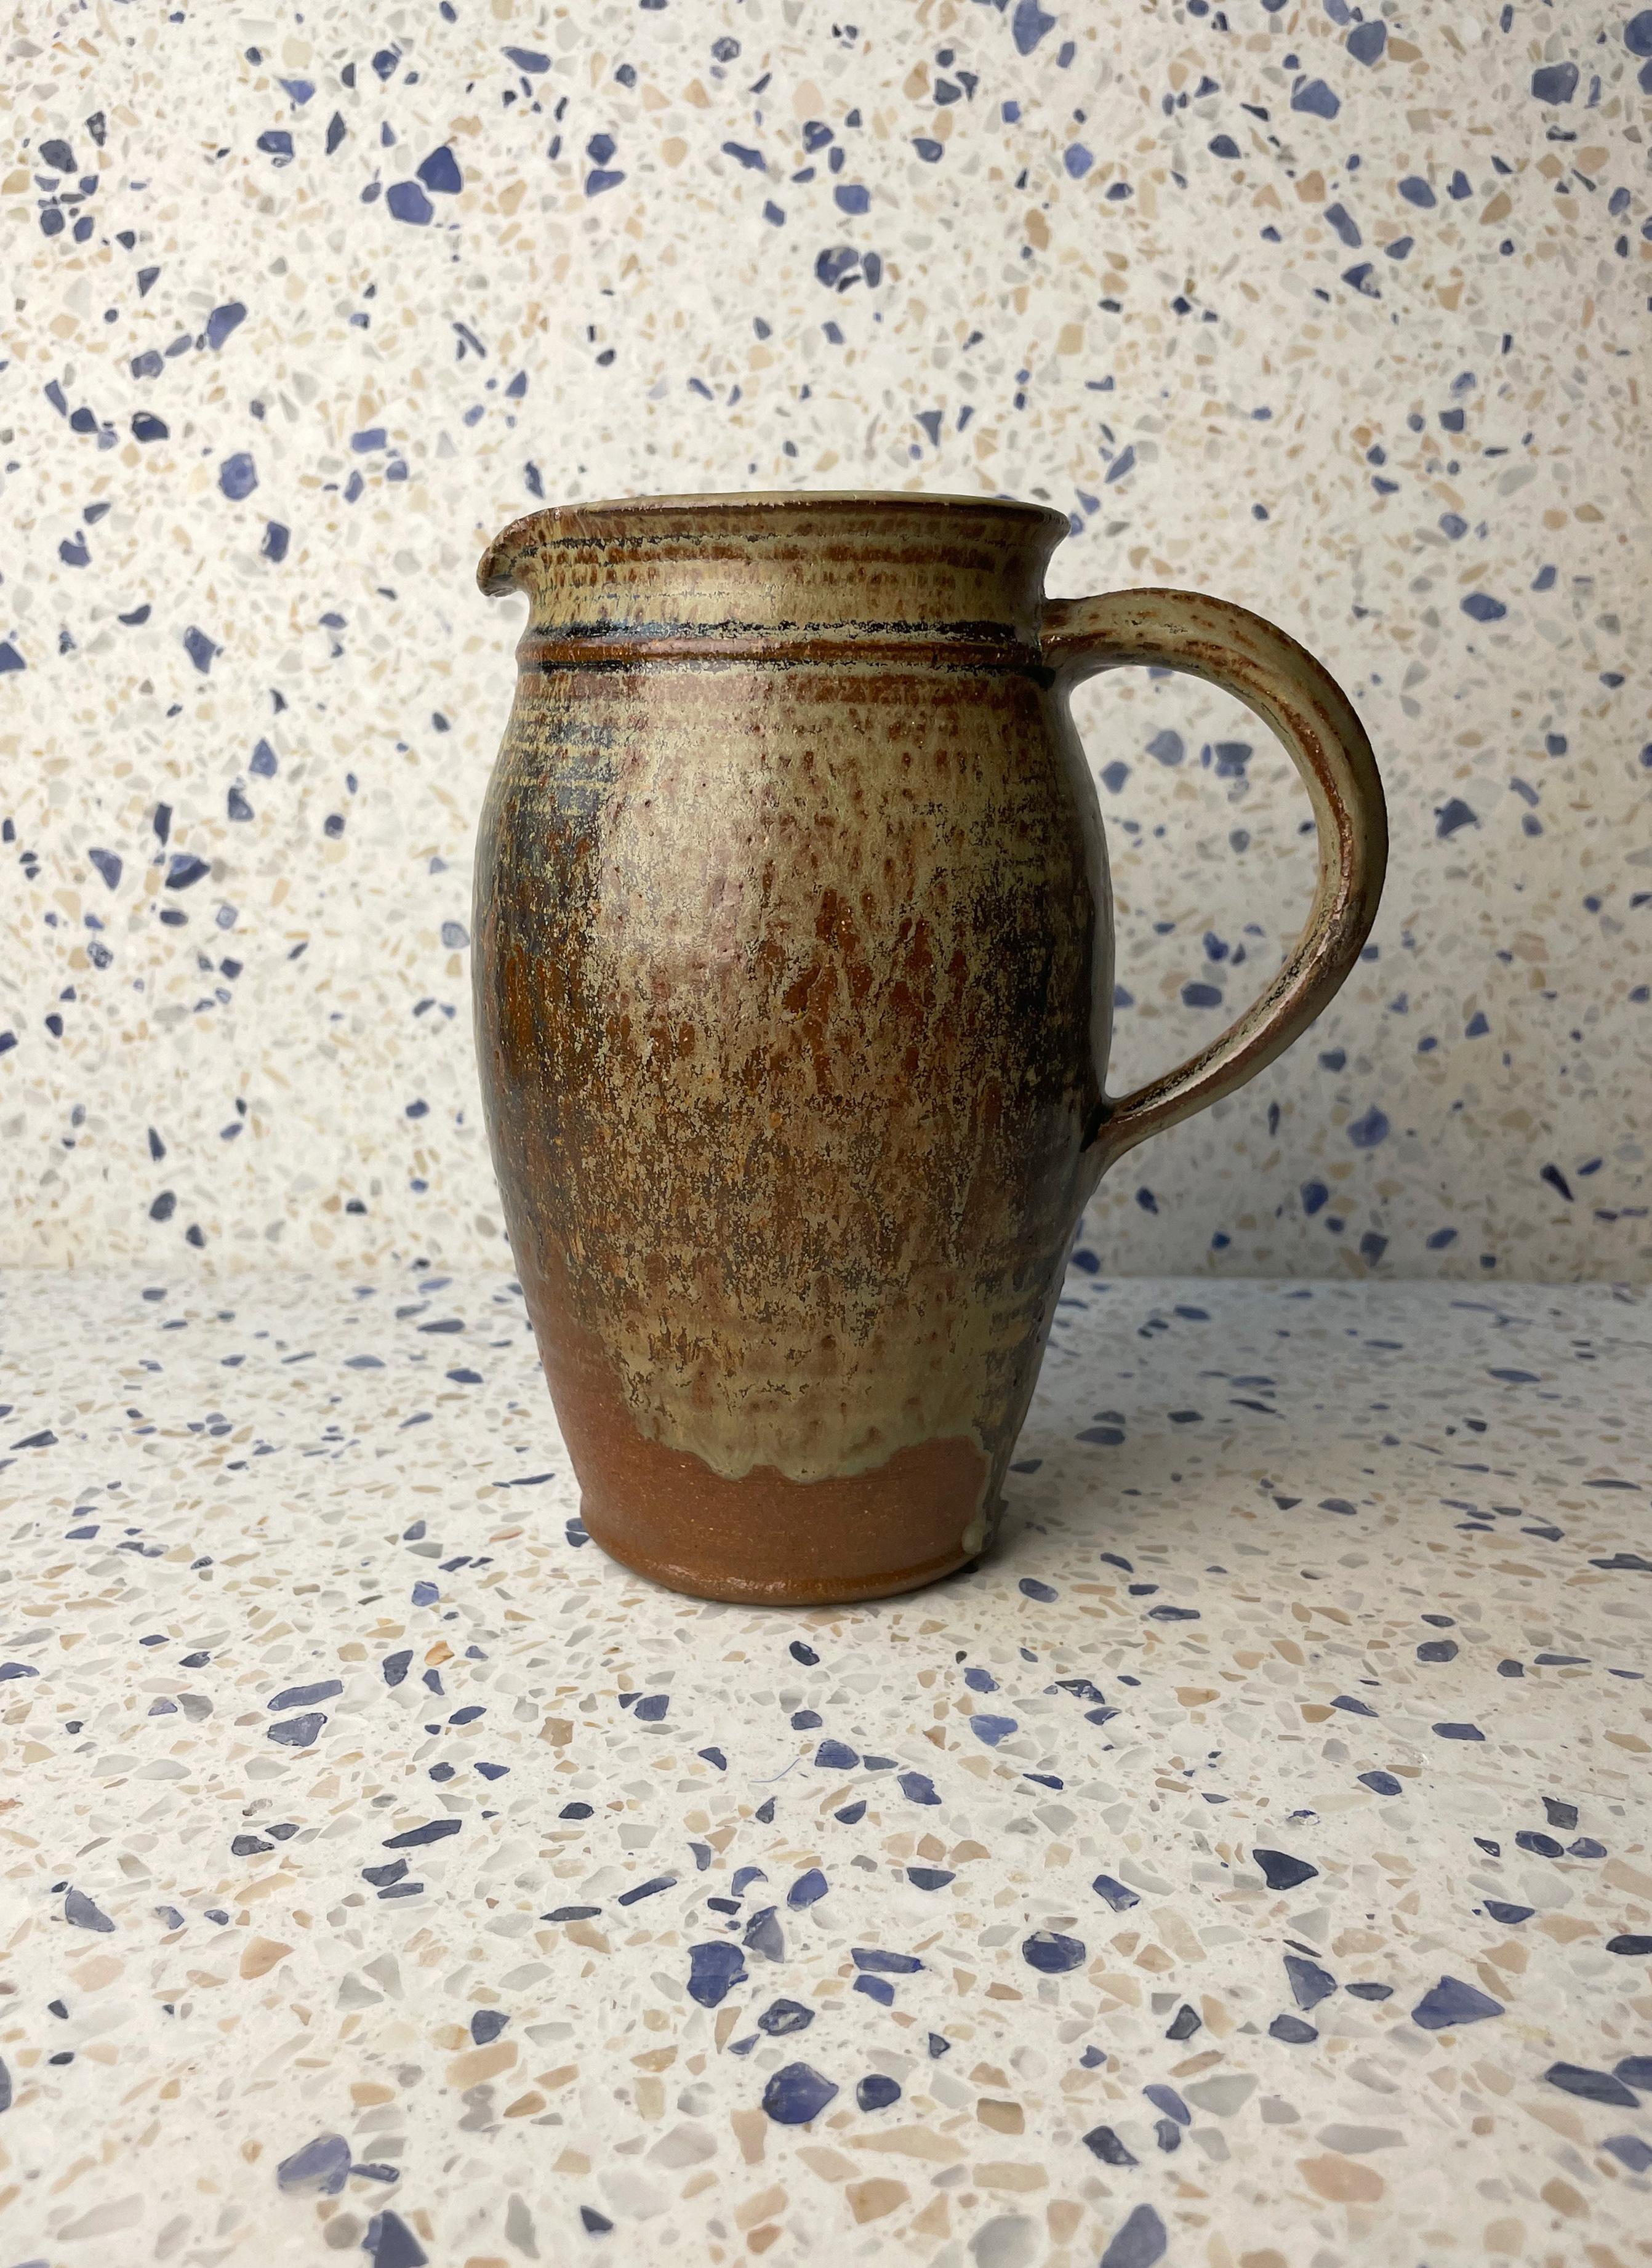 Handmade Danish modern ceramic pitcher vase with organic earth colored running glaze. Dark brown, artichoke, taupe, tan, blue and moss colors in a beautiful mix. Glazed inside and out. Raw ceramic on the base. Beautiful vintage condition.
Denmark,